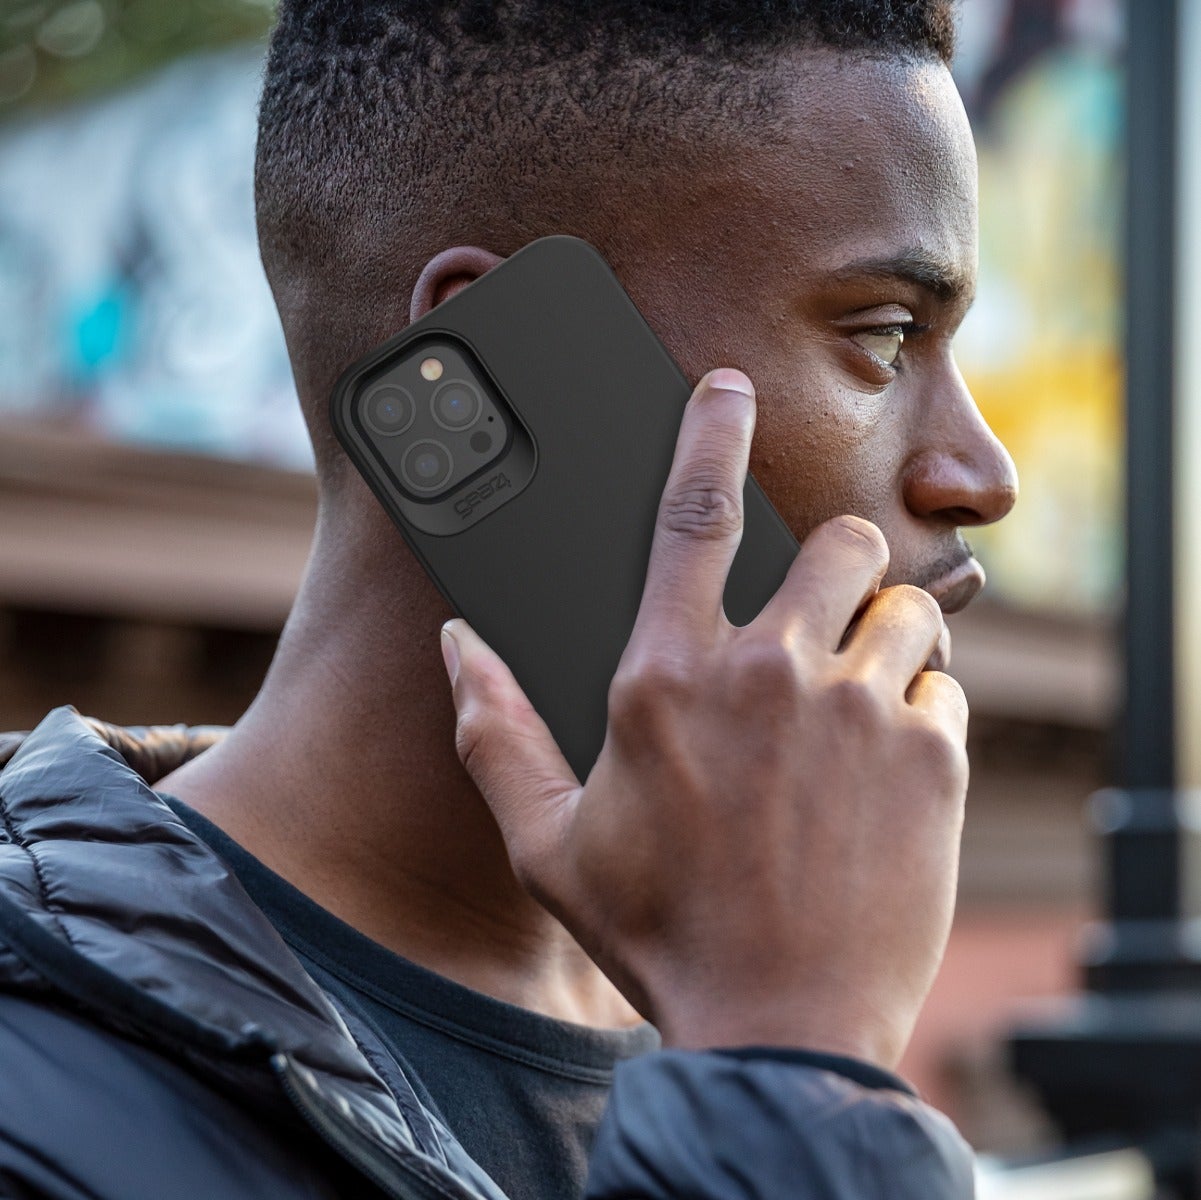 5G Compatible
||The Holborn Slim case is 5G compatible so you get a clear, strong signal.